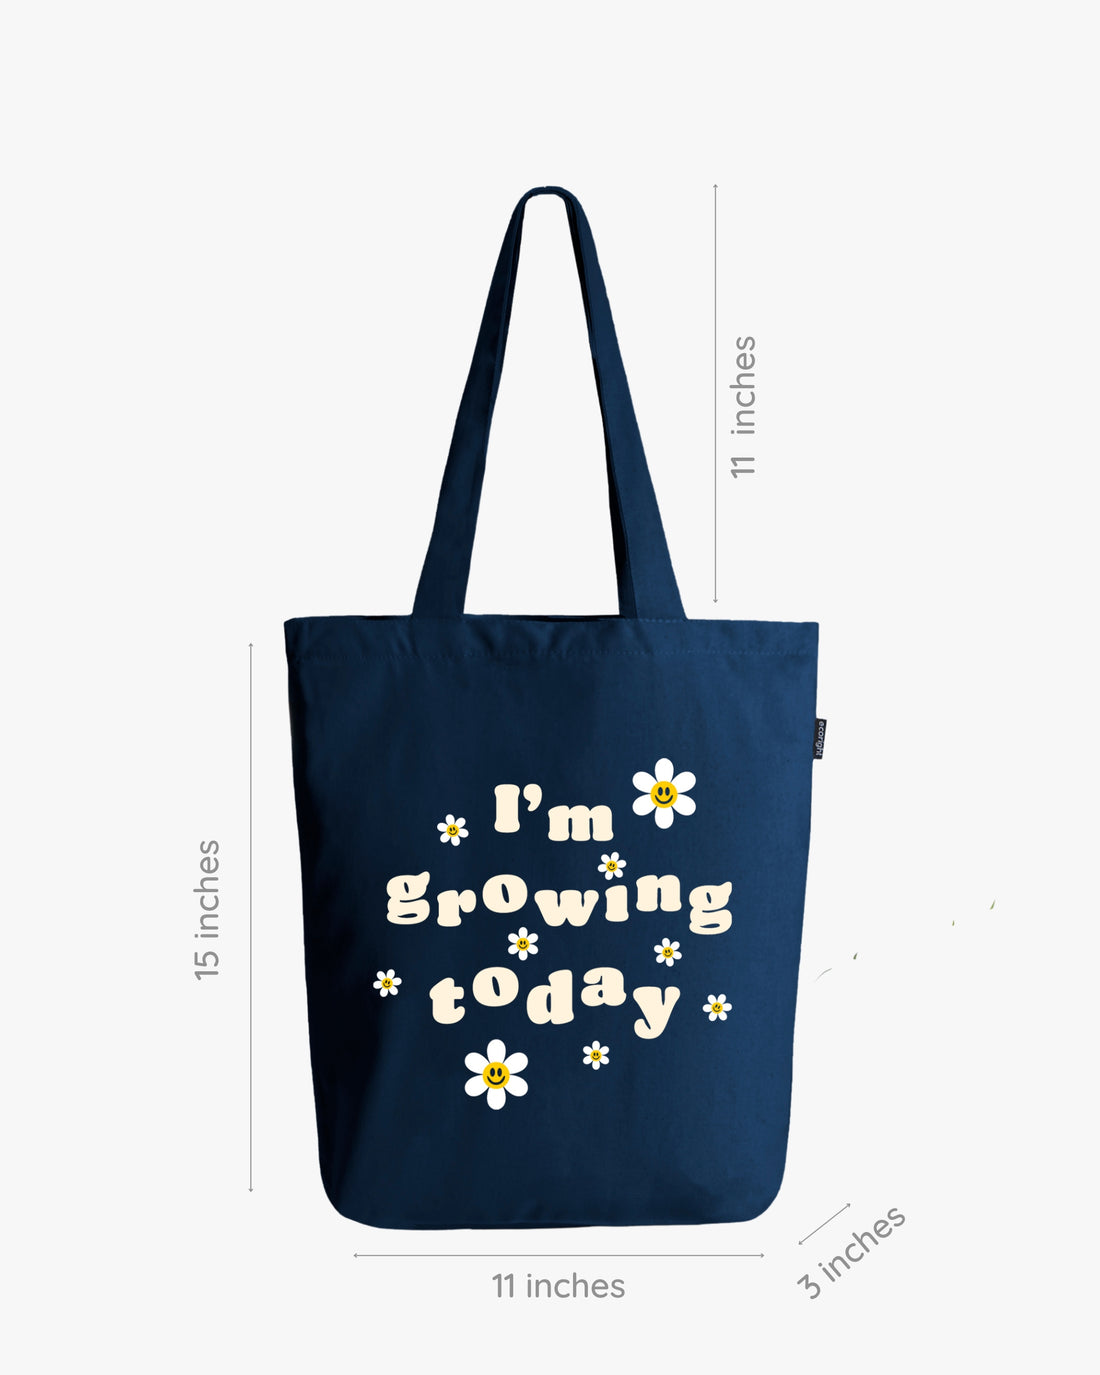 Tote bags for office, Cotton bag, Canvas bag tote, Bags bags, Print on bags, Ecoright tote bags